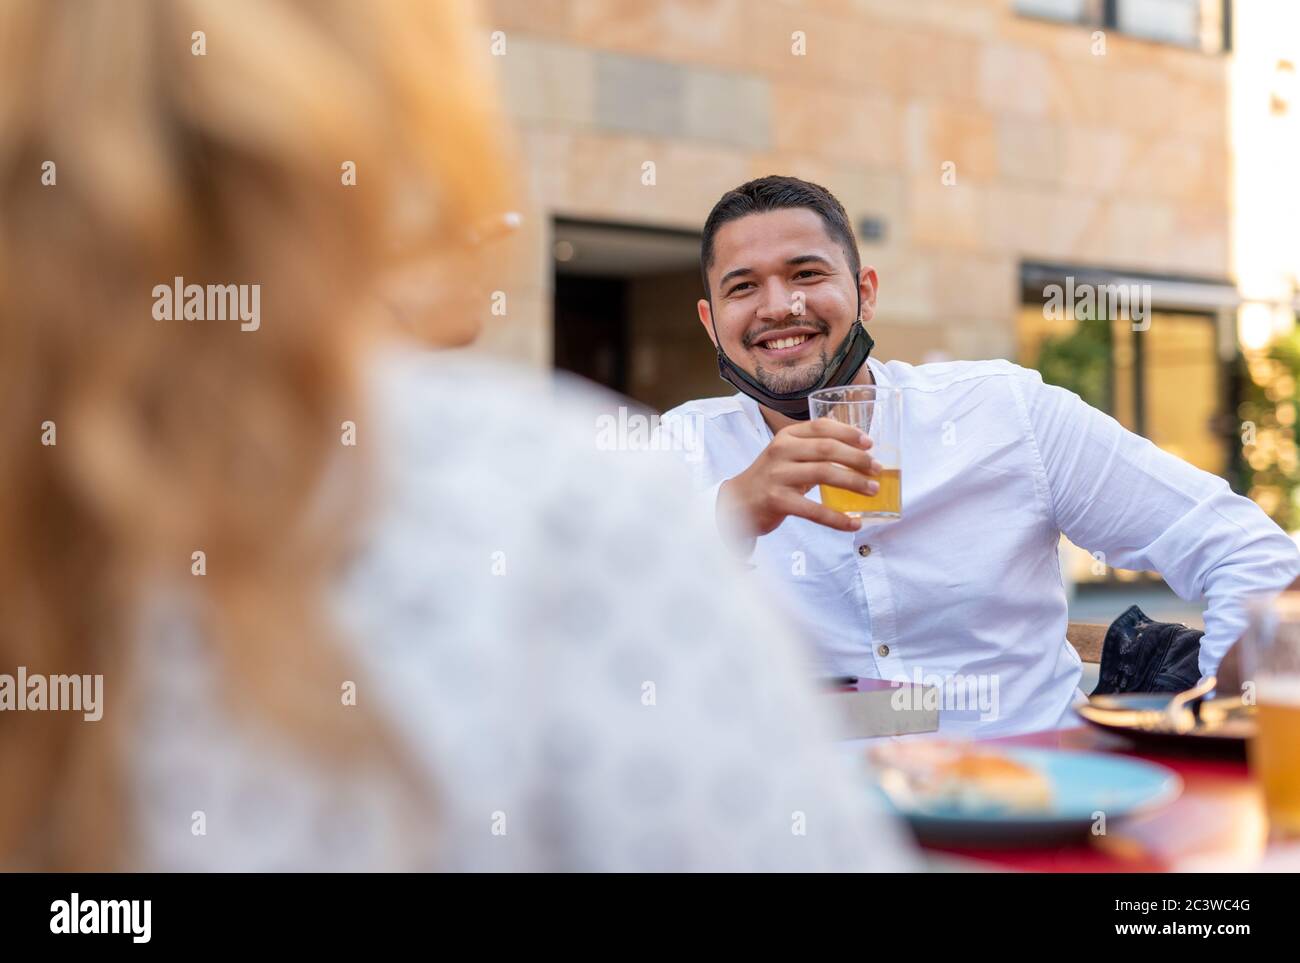 the new normality after the coronavirus epidemic, focus on the young man drinking a beer, wearing the protective mask under his chin and keeping socia Stock Photo